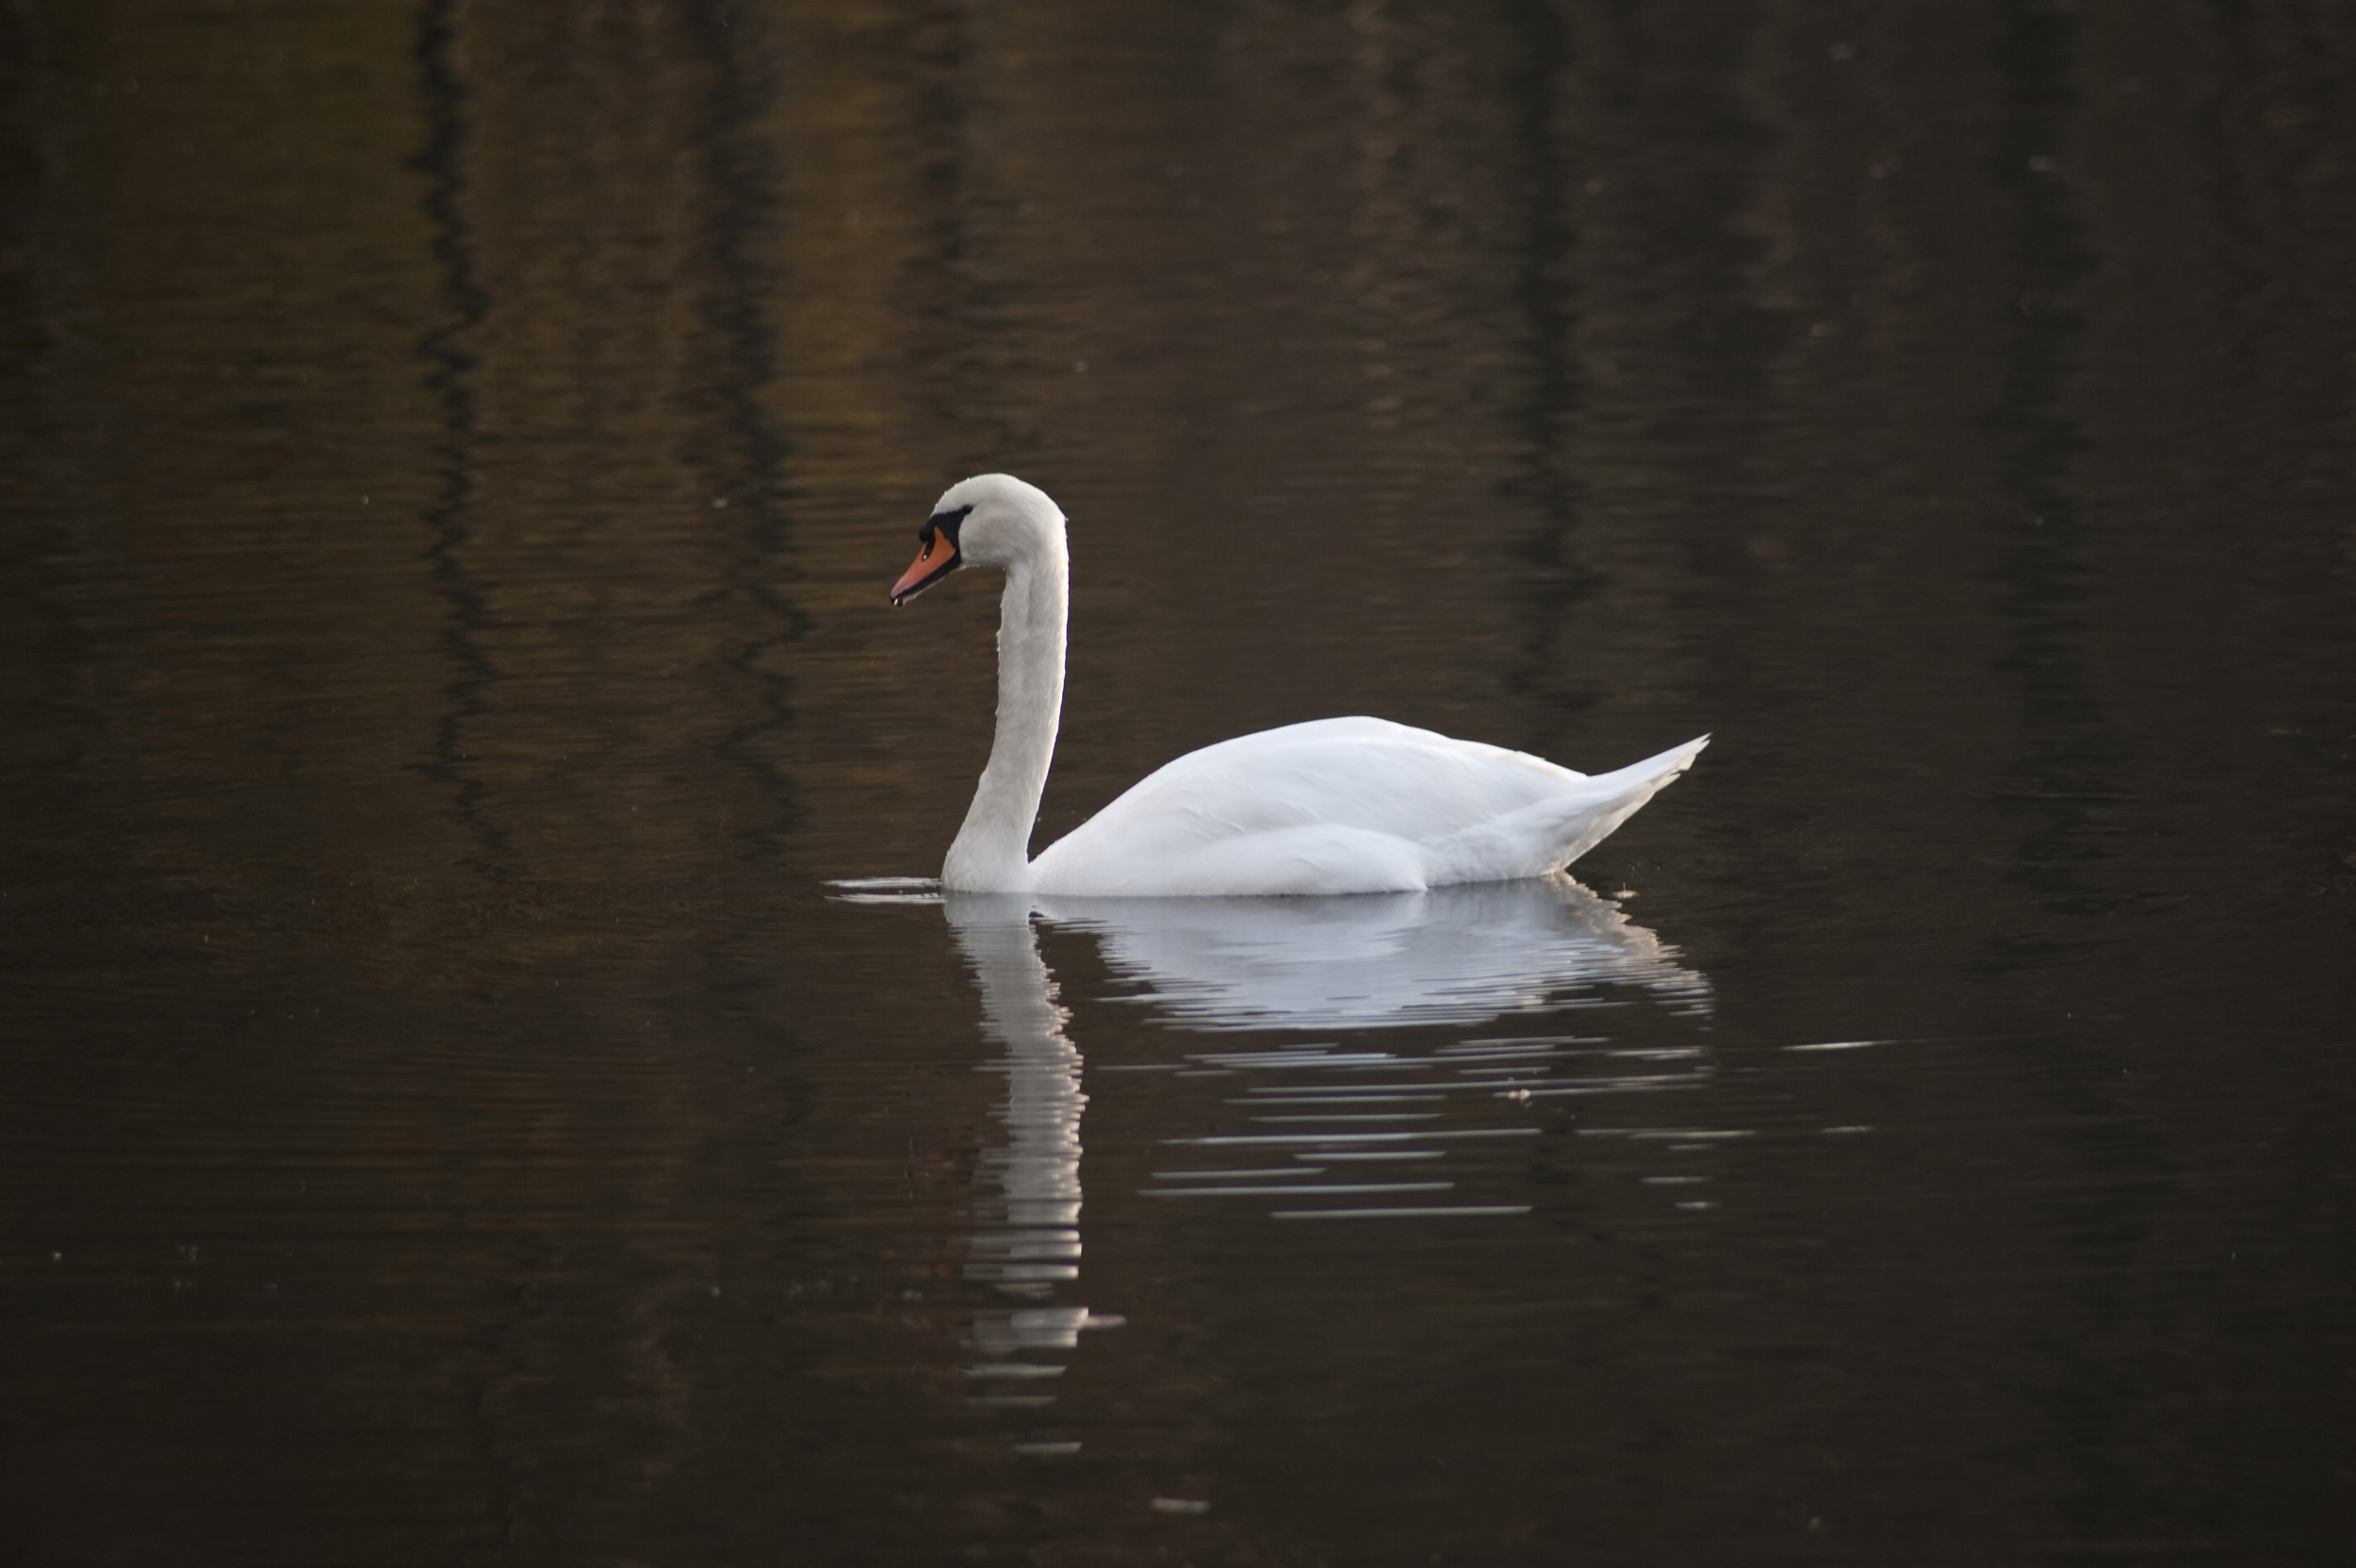 Free image of Swan swimming with reflection